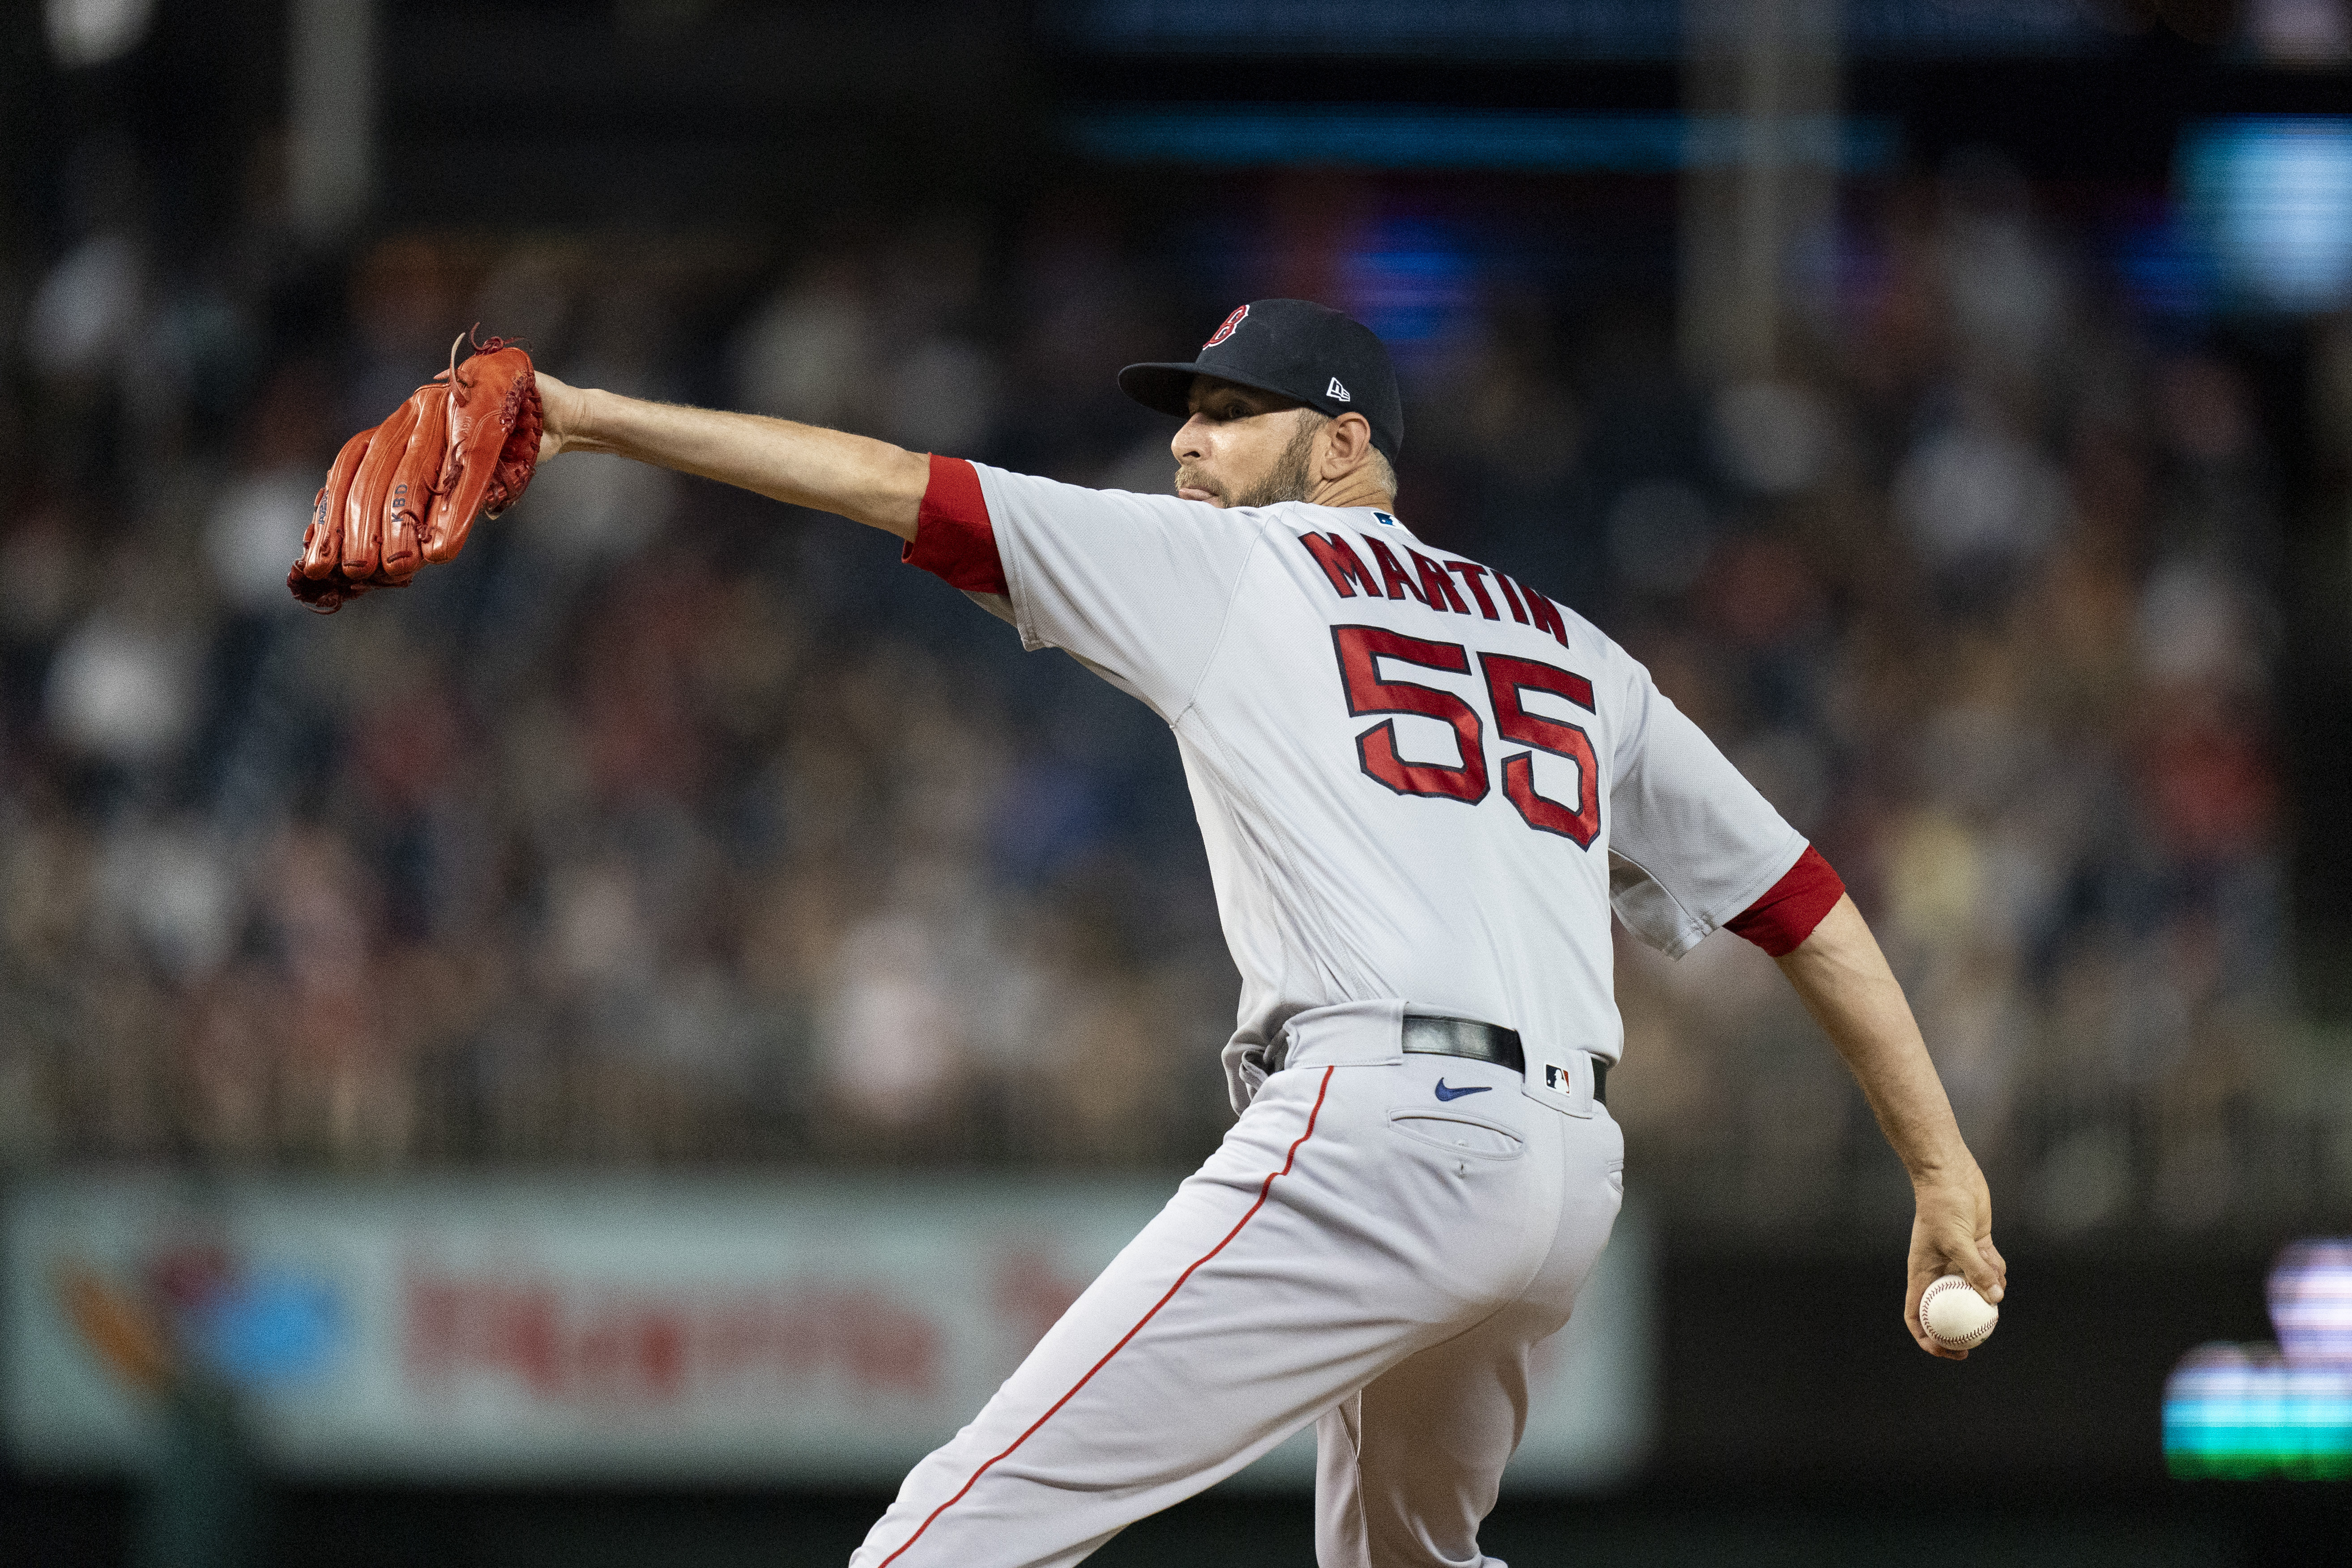 It was worth the wait for the Red Sox to land strike-throwing reliever Chris Martin